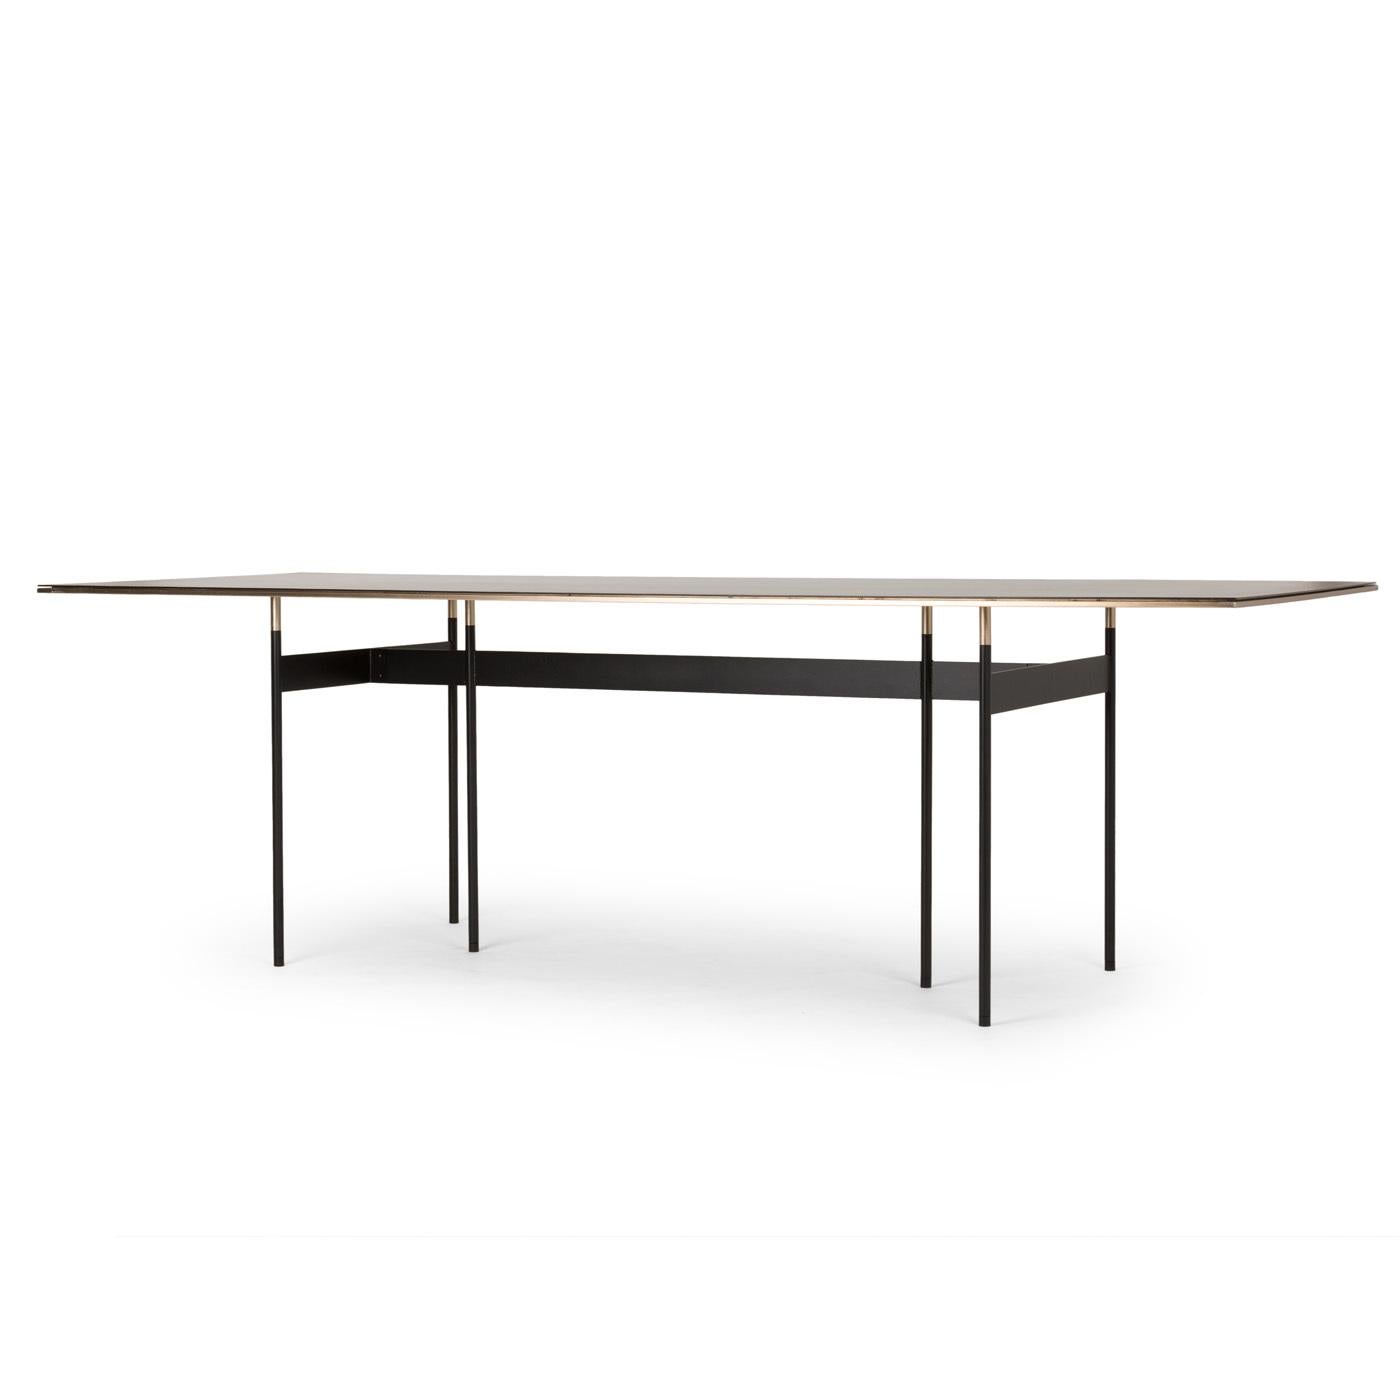 Designed by Simone Bonanni, this exquisite table mixes the horizontal lines of the top, with the vertical elements of the inner structure and legs, creating a piece made of air and metal. Visually rigorous, elegant, and exclusive, its silhouette